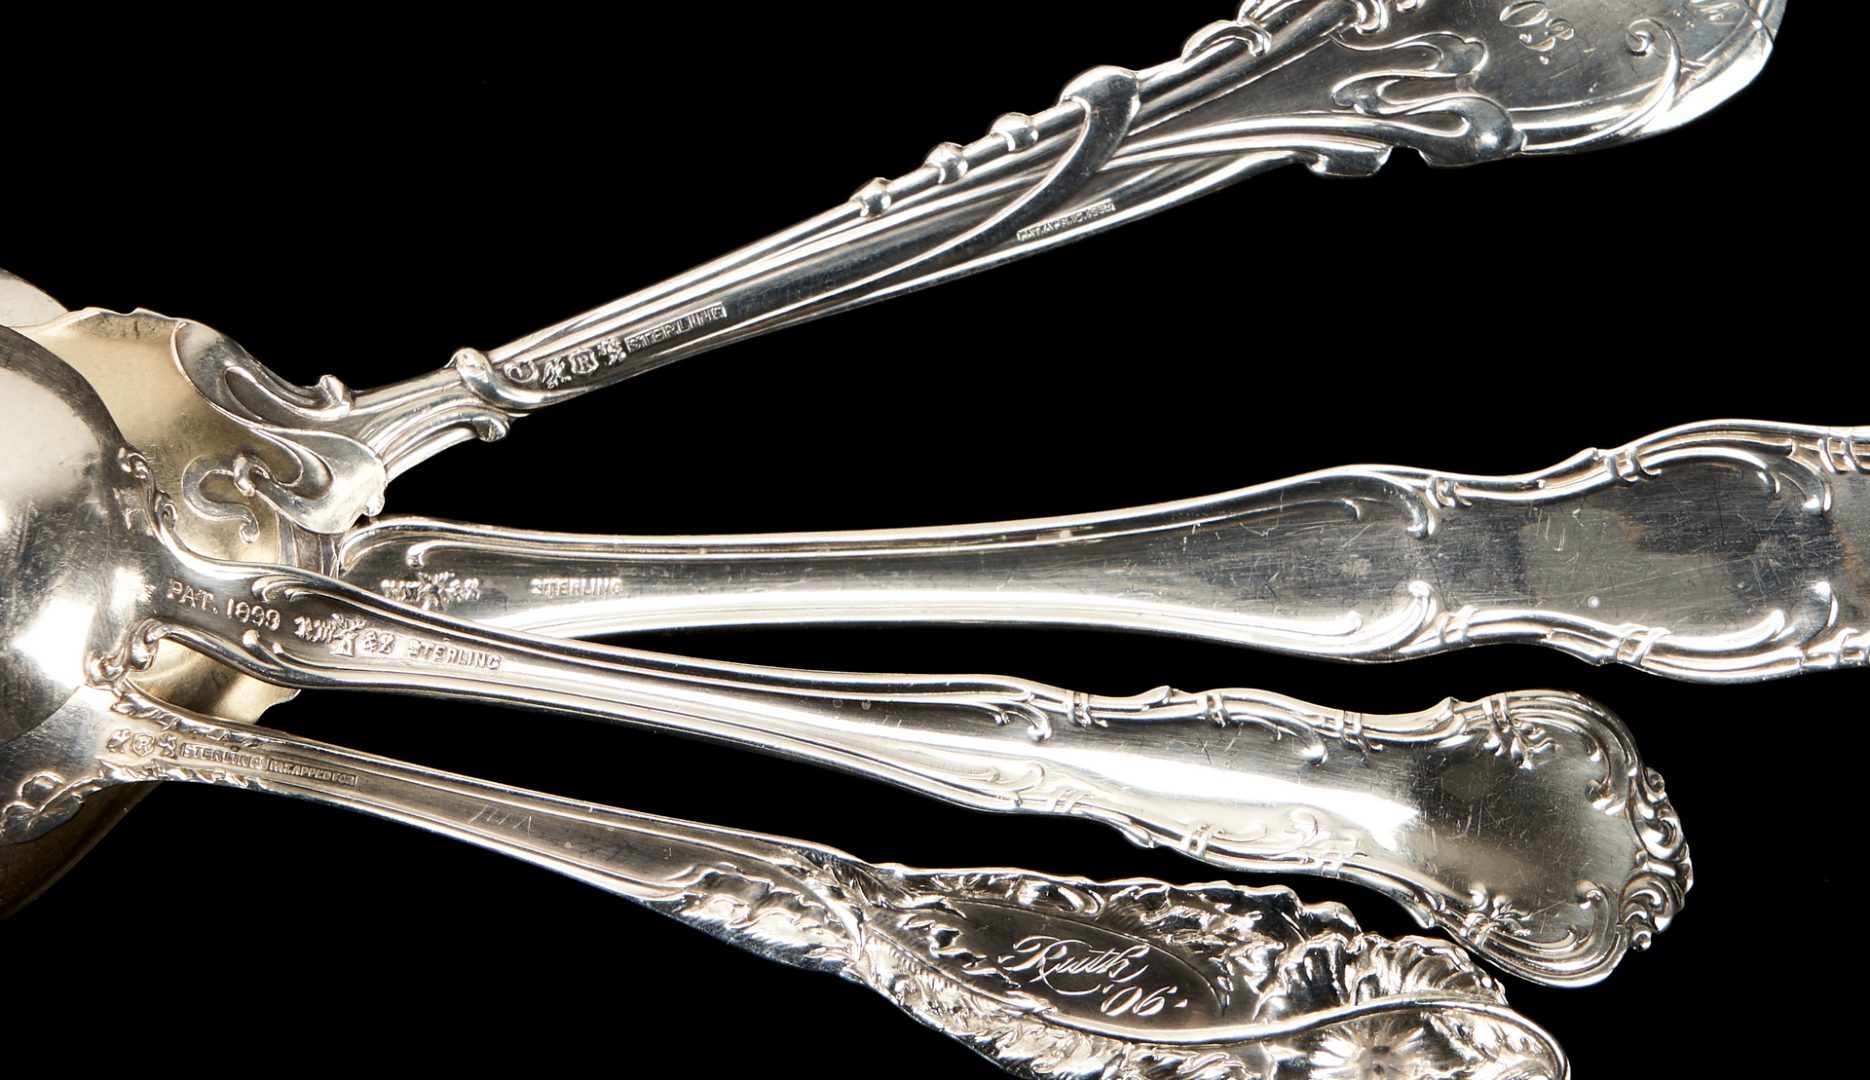 Lot 52: 28 Pcs. Wallace and Reed & Barton Sterling Silver Flatware